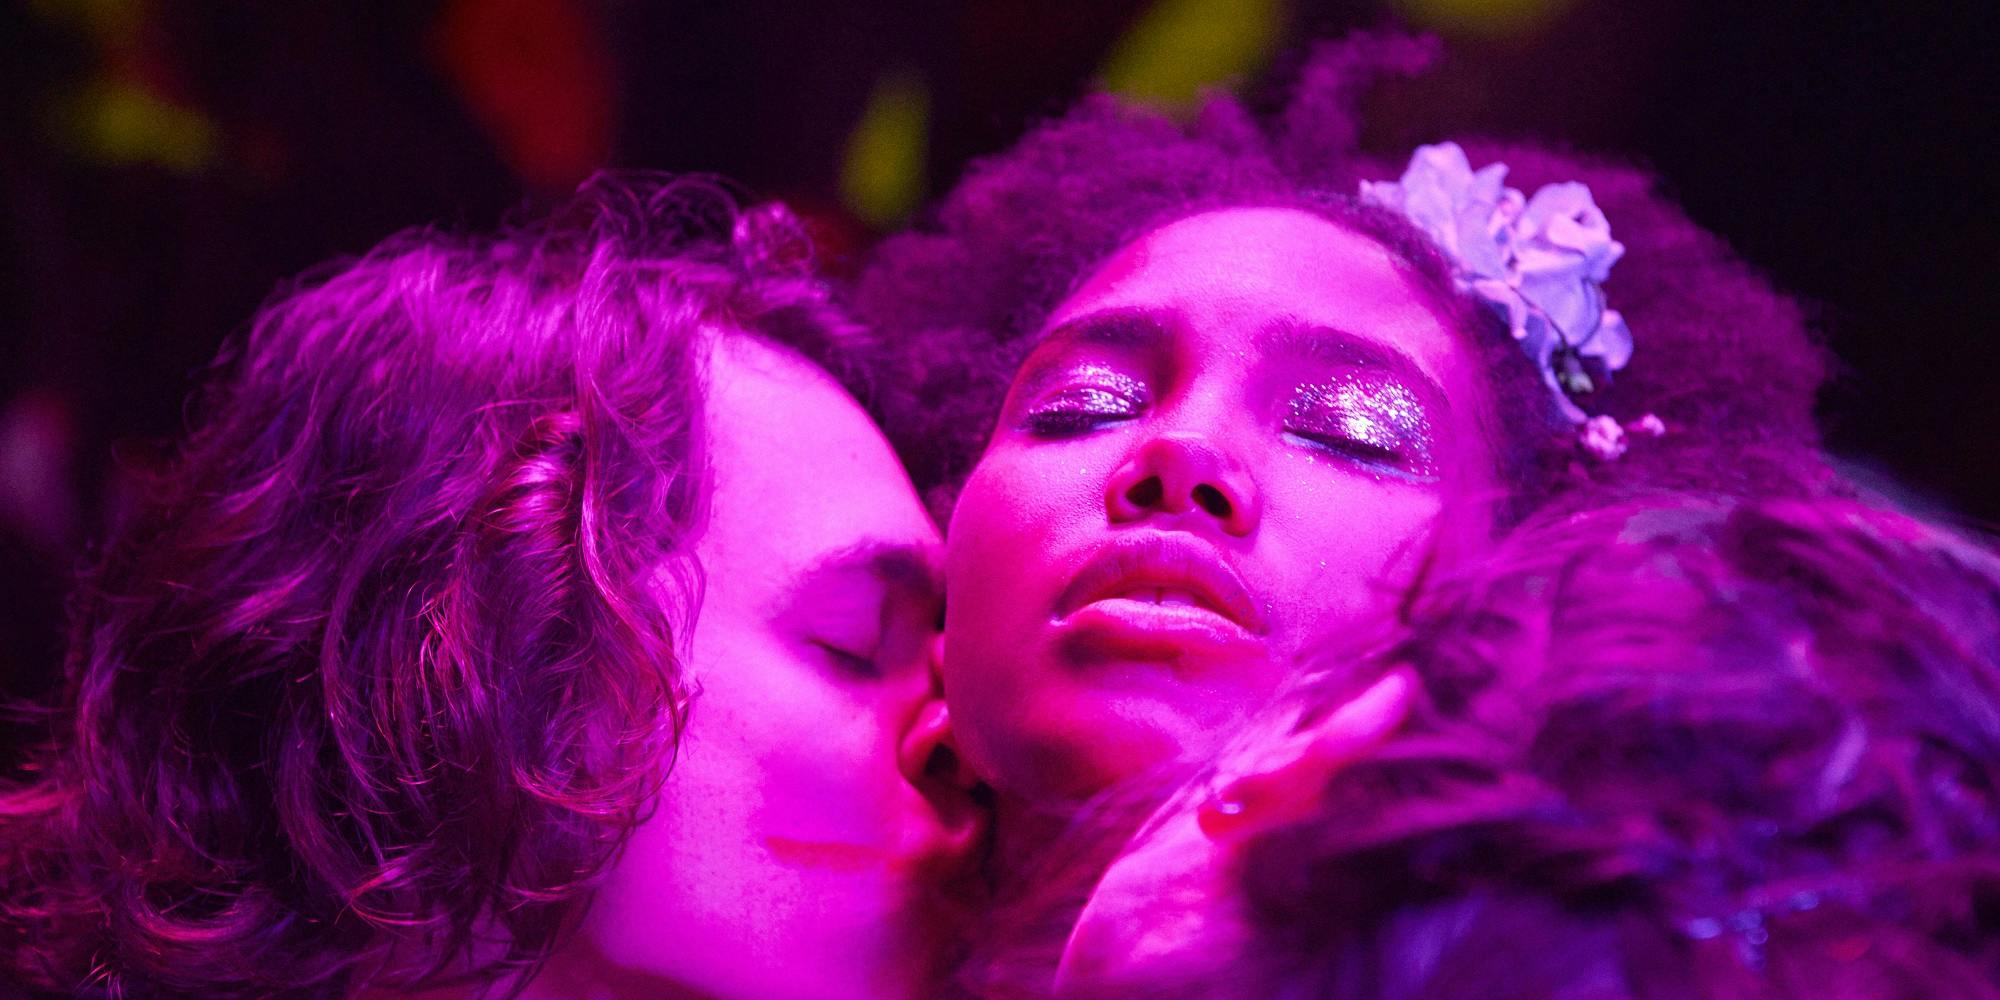 Only For Love Review: Netflix's Brazillian Romance Series is High on  Predictable Drama